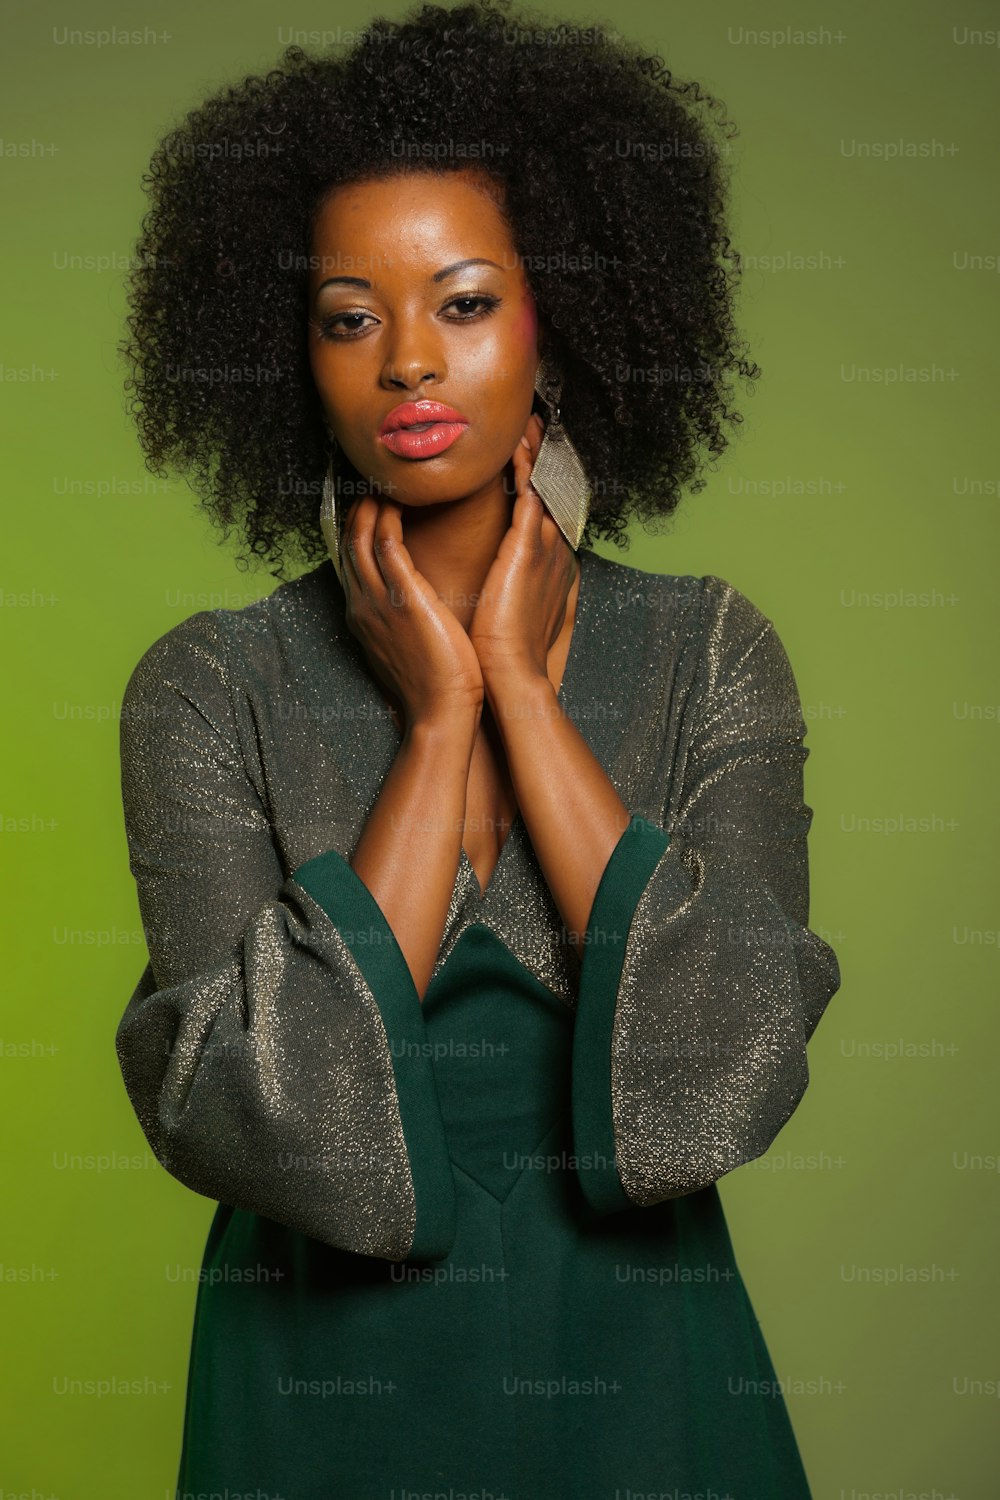 Sensual retro seventies fashion afro woman with green dress. Green background.